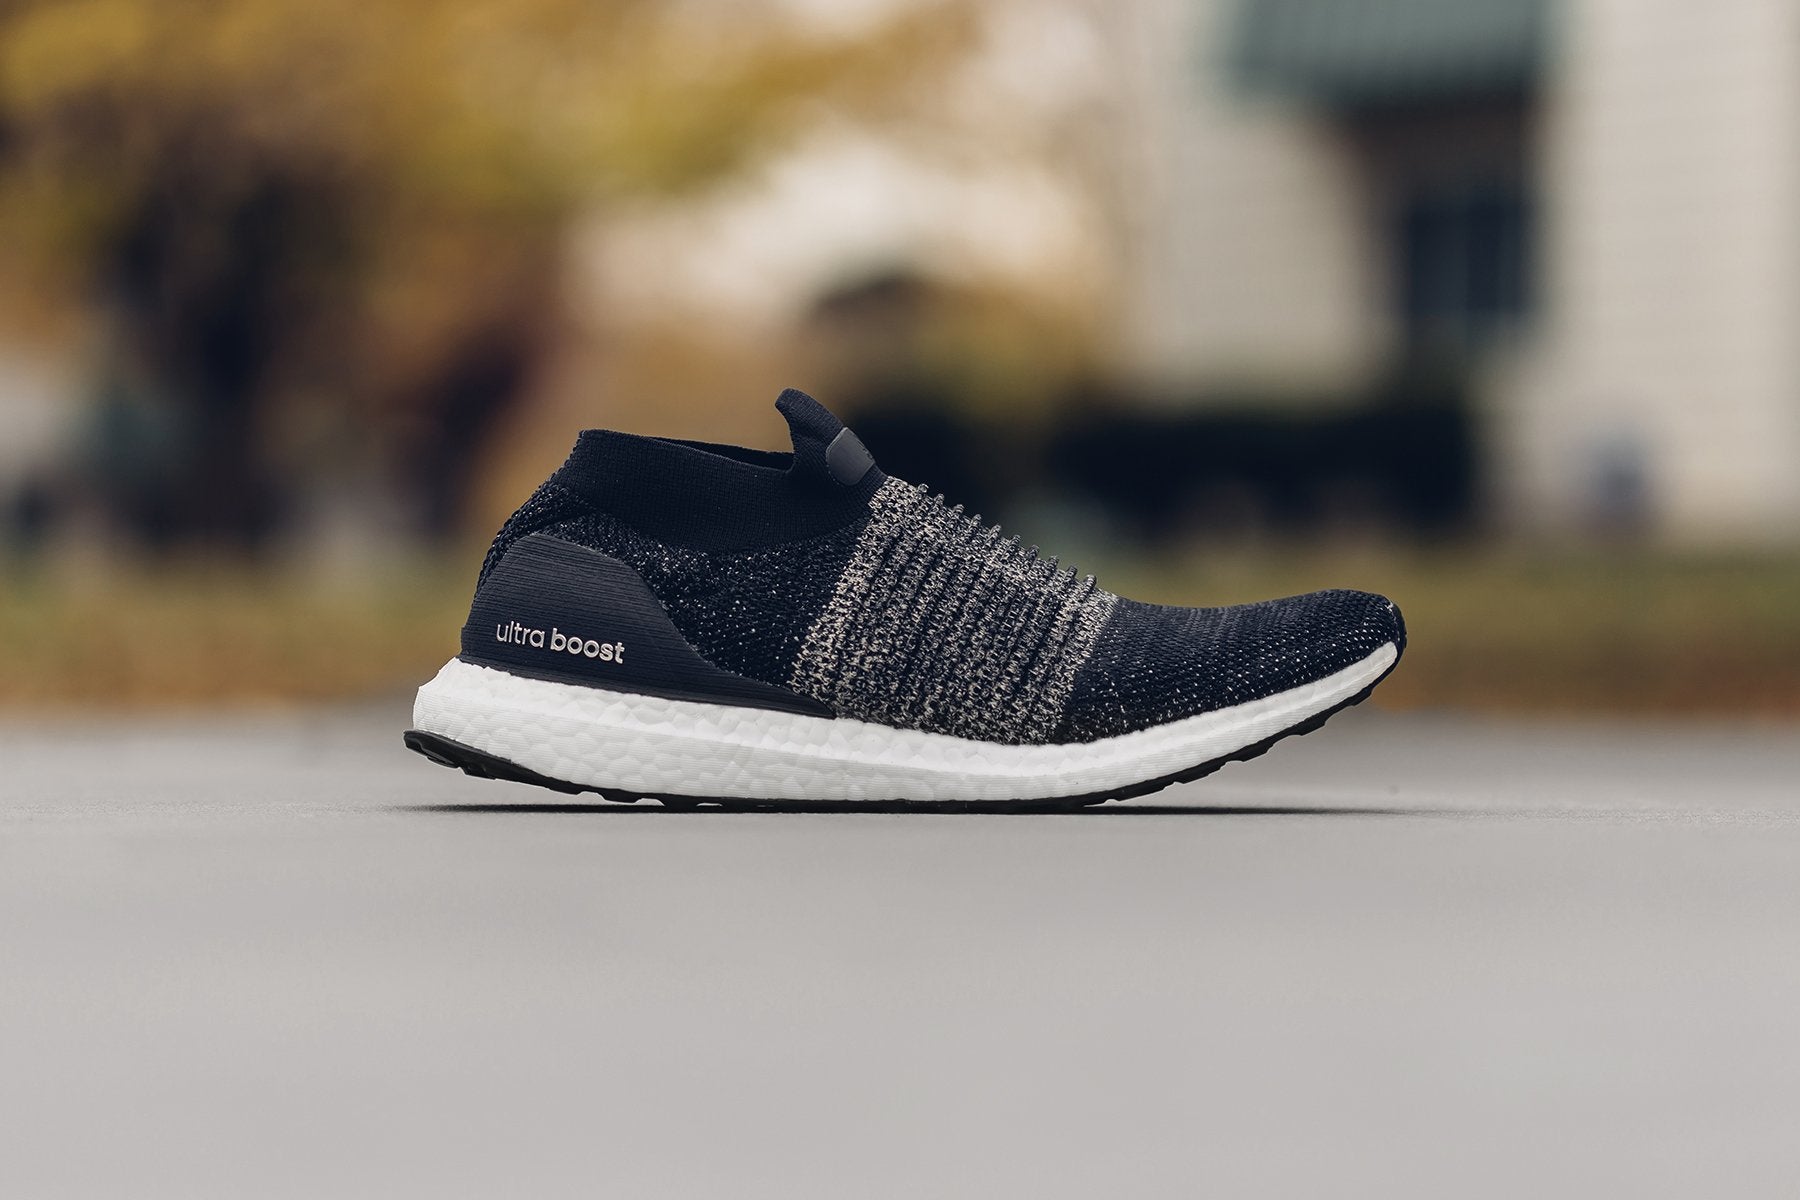 Adidas Originals Ultraboost Laceless in Legend Ink/Raw Gold Available